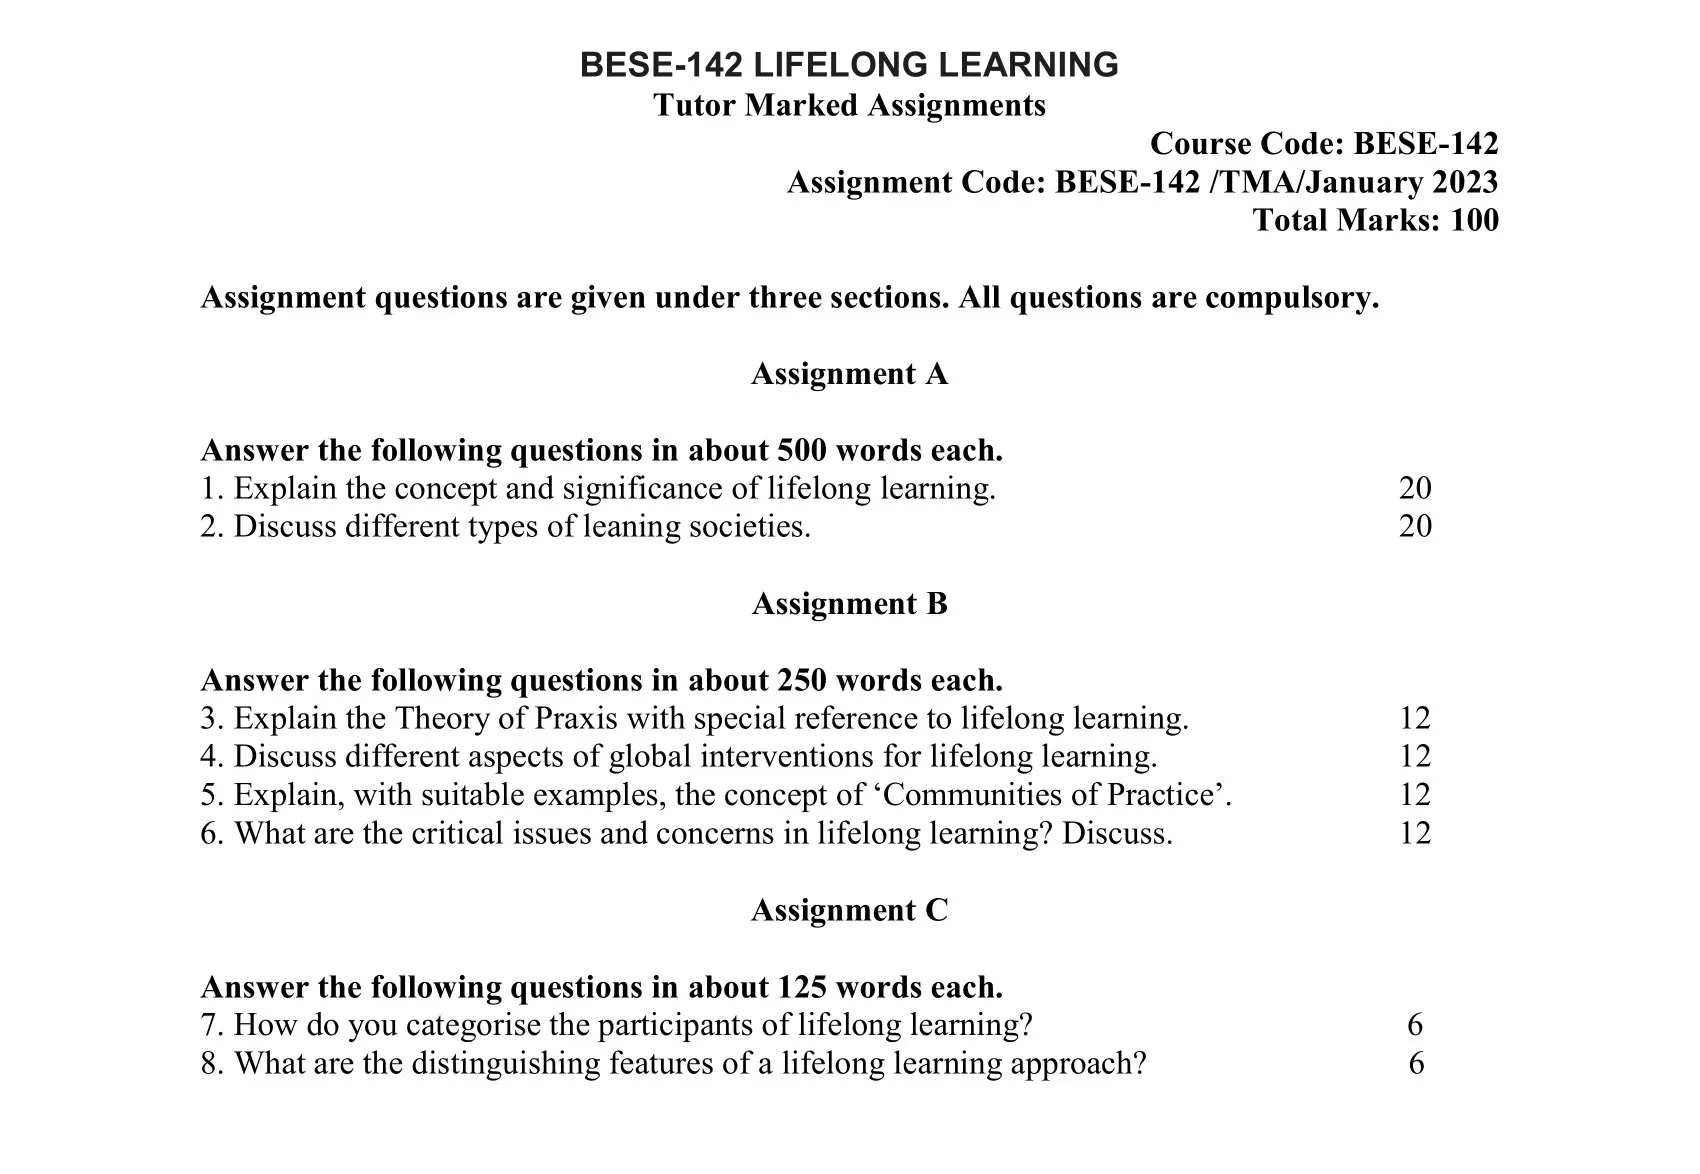 BESE-142 IGNOU BAG Solved Assignment-LIFELONG LEARNING